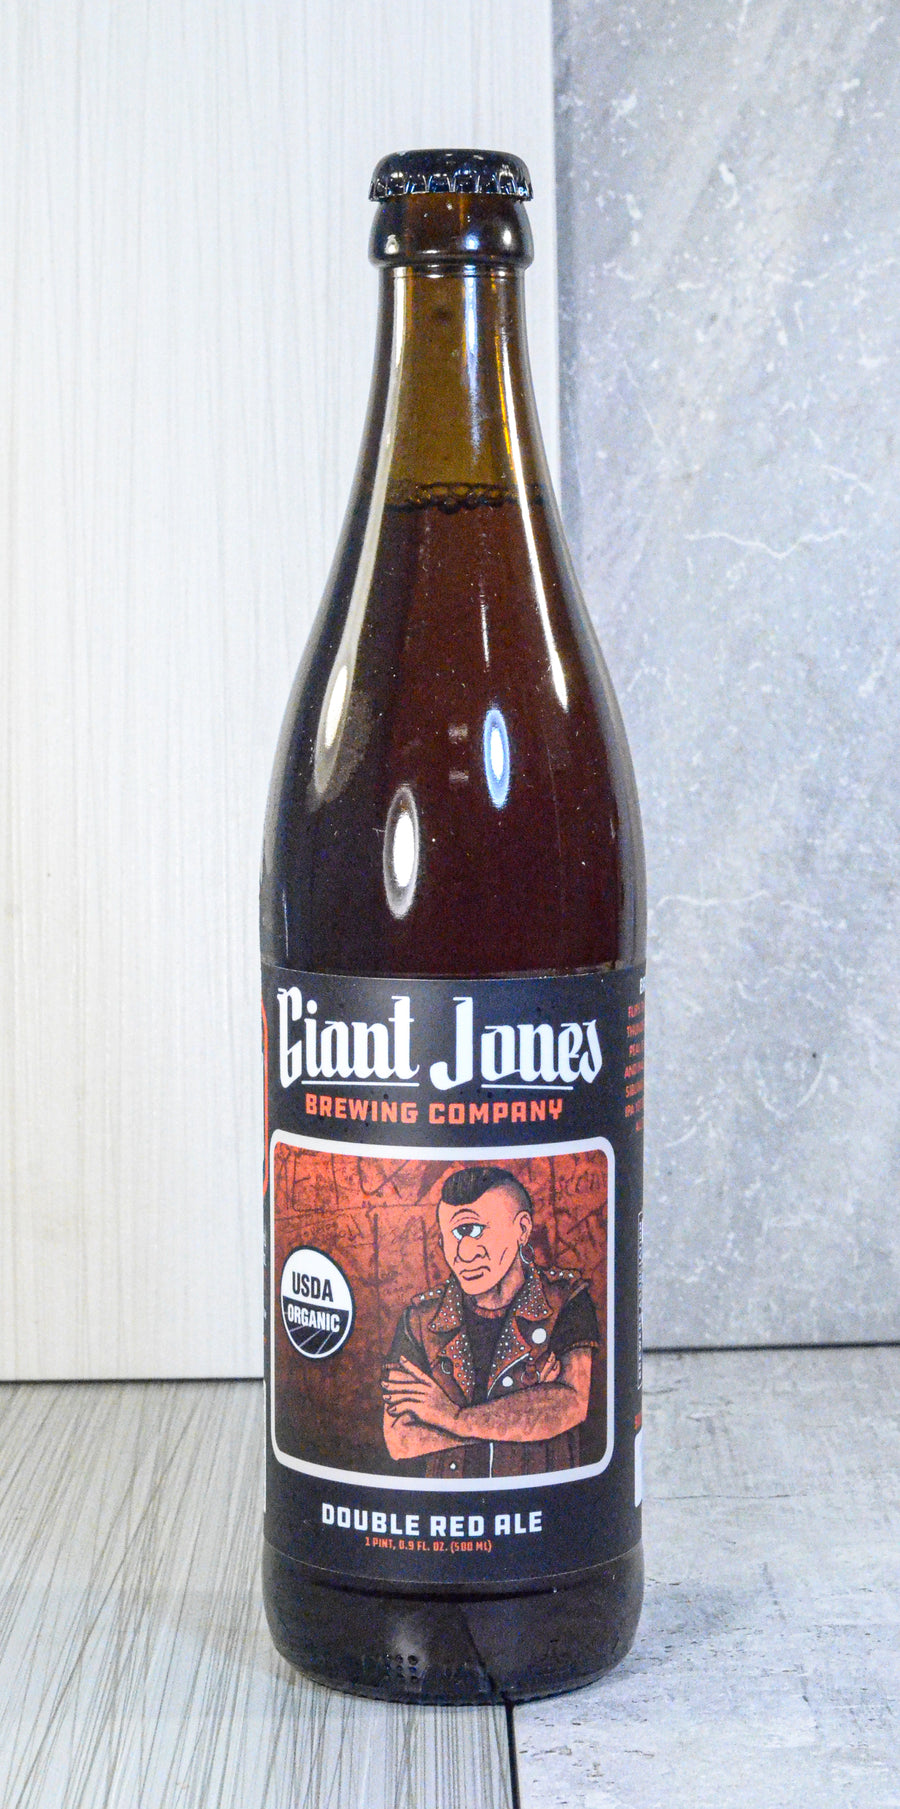 Giant Jones Brewing, Double Red Ale